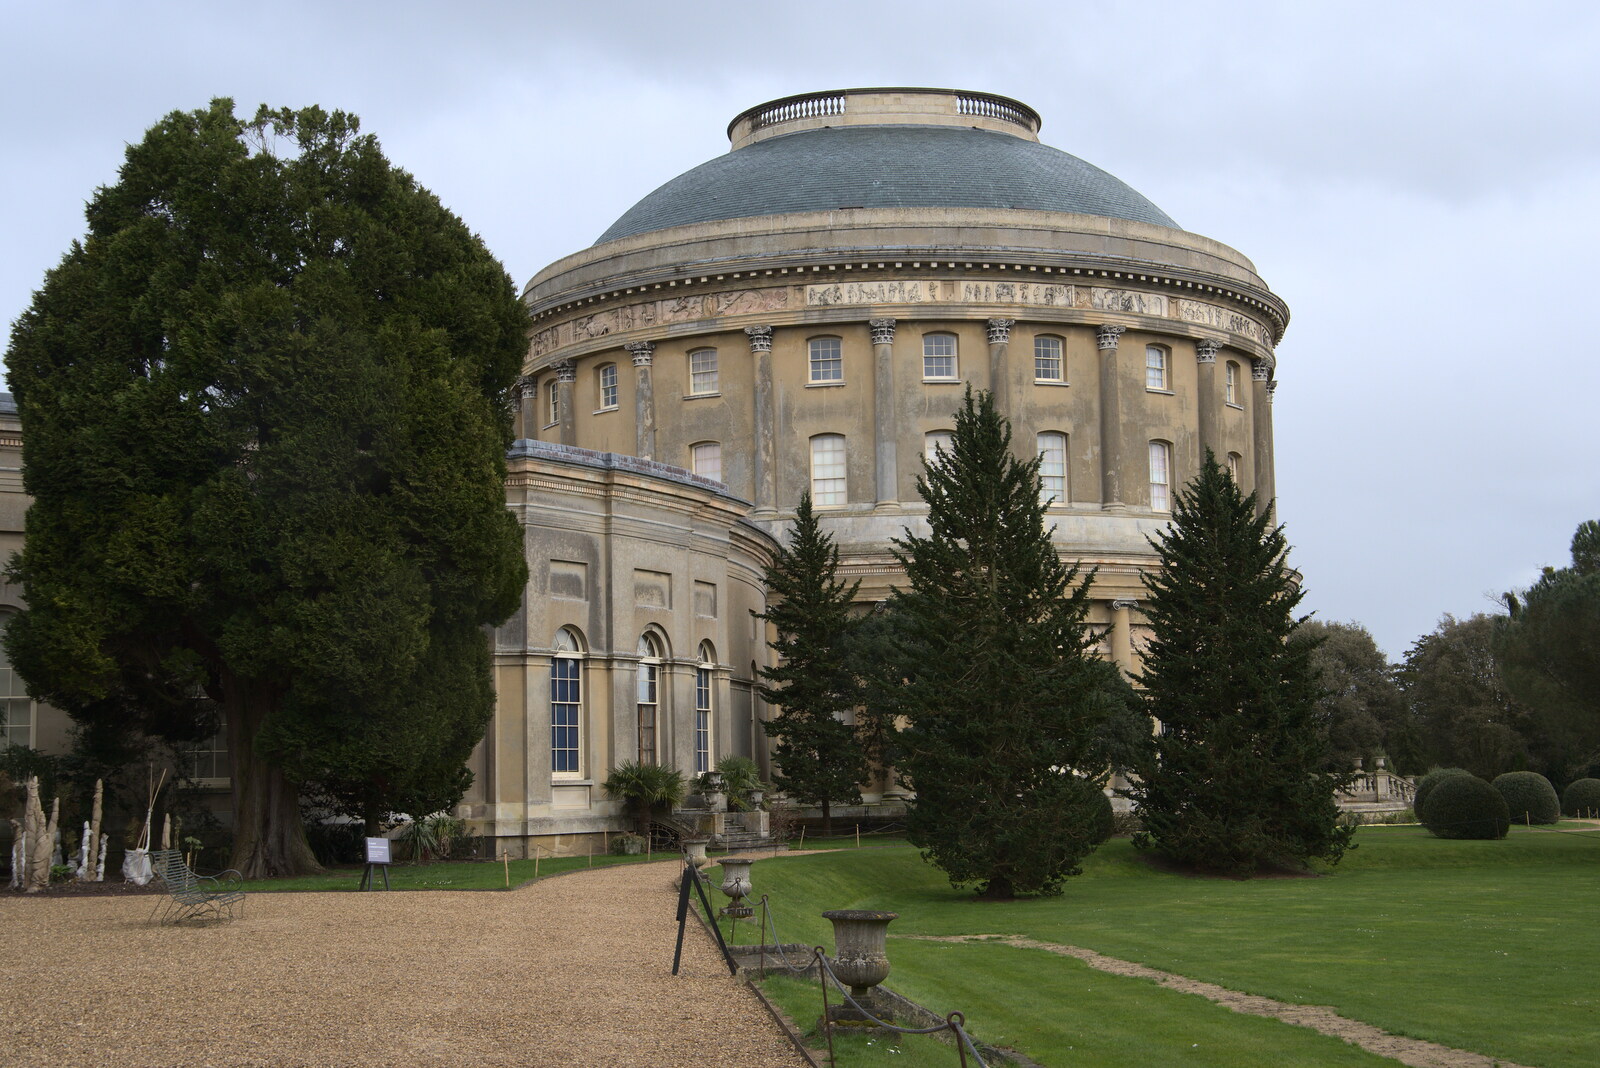 The newly-re-roofed rotunda from A Return to Ickworth House, Horringer, Suffolk - 11th April 2021